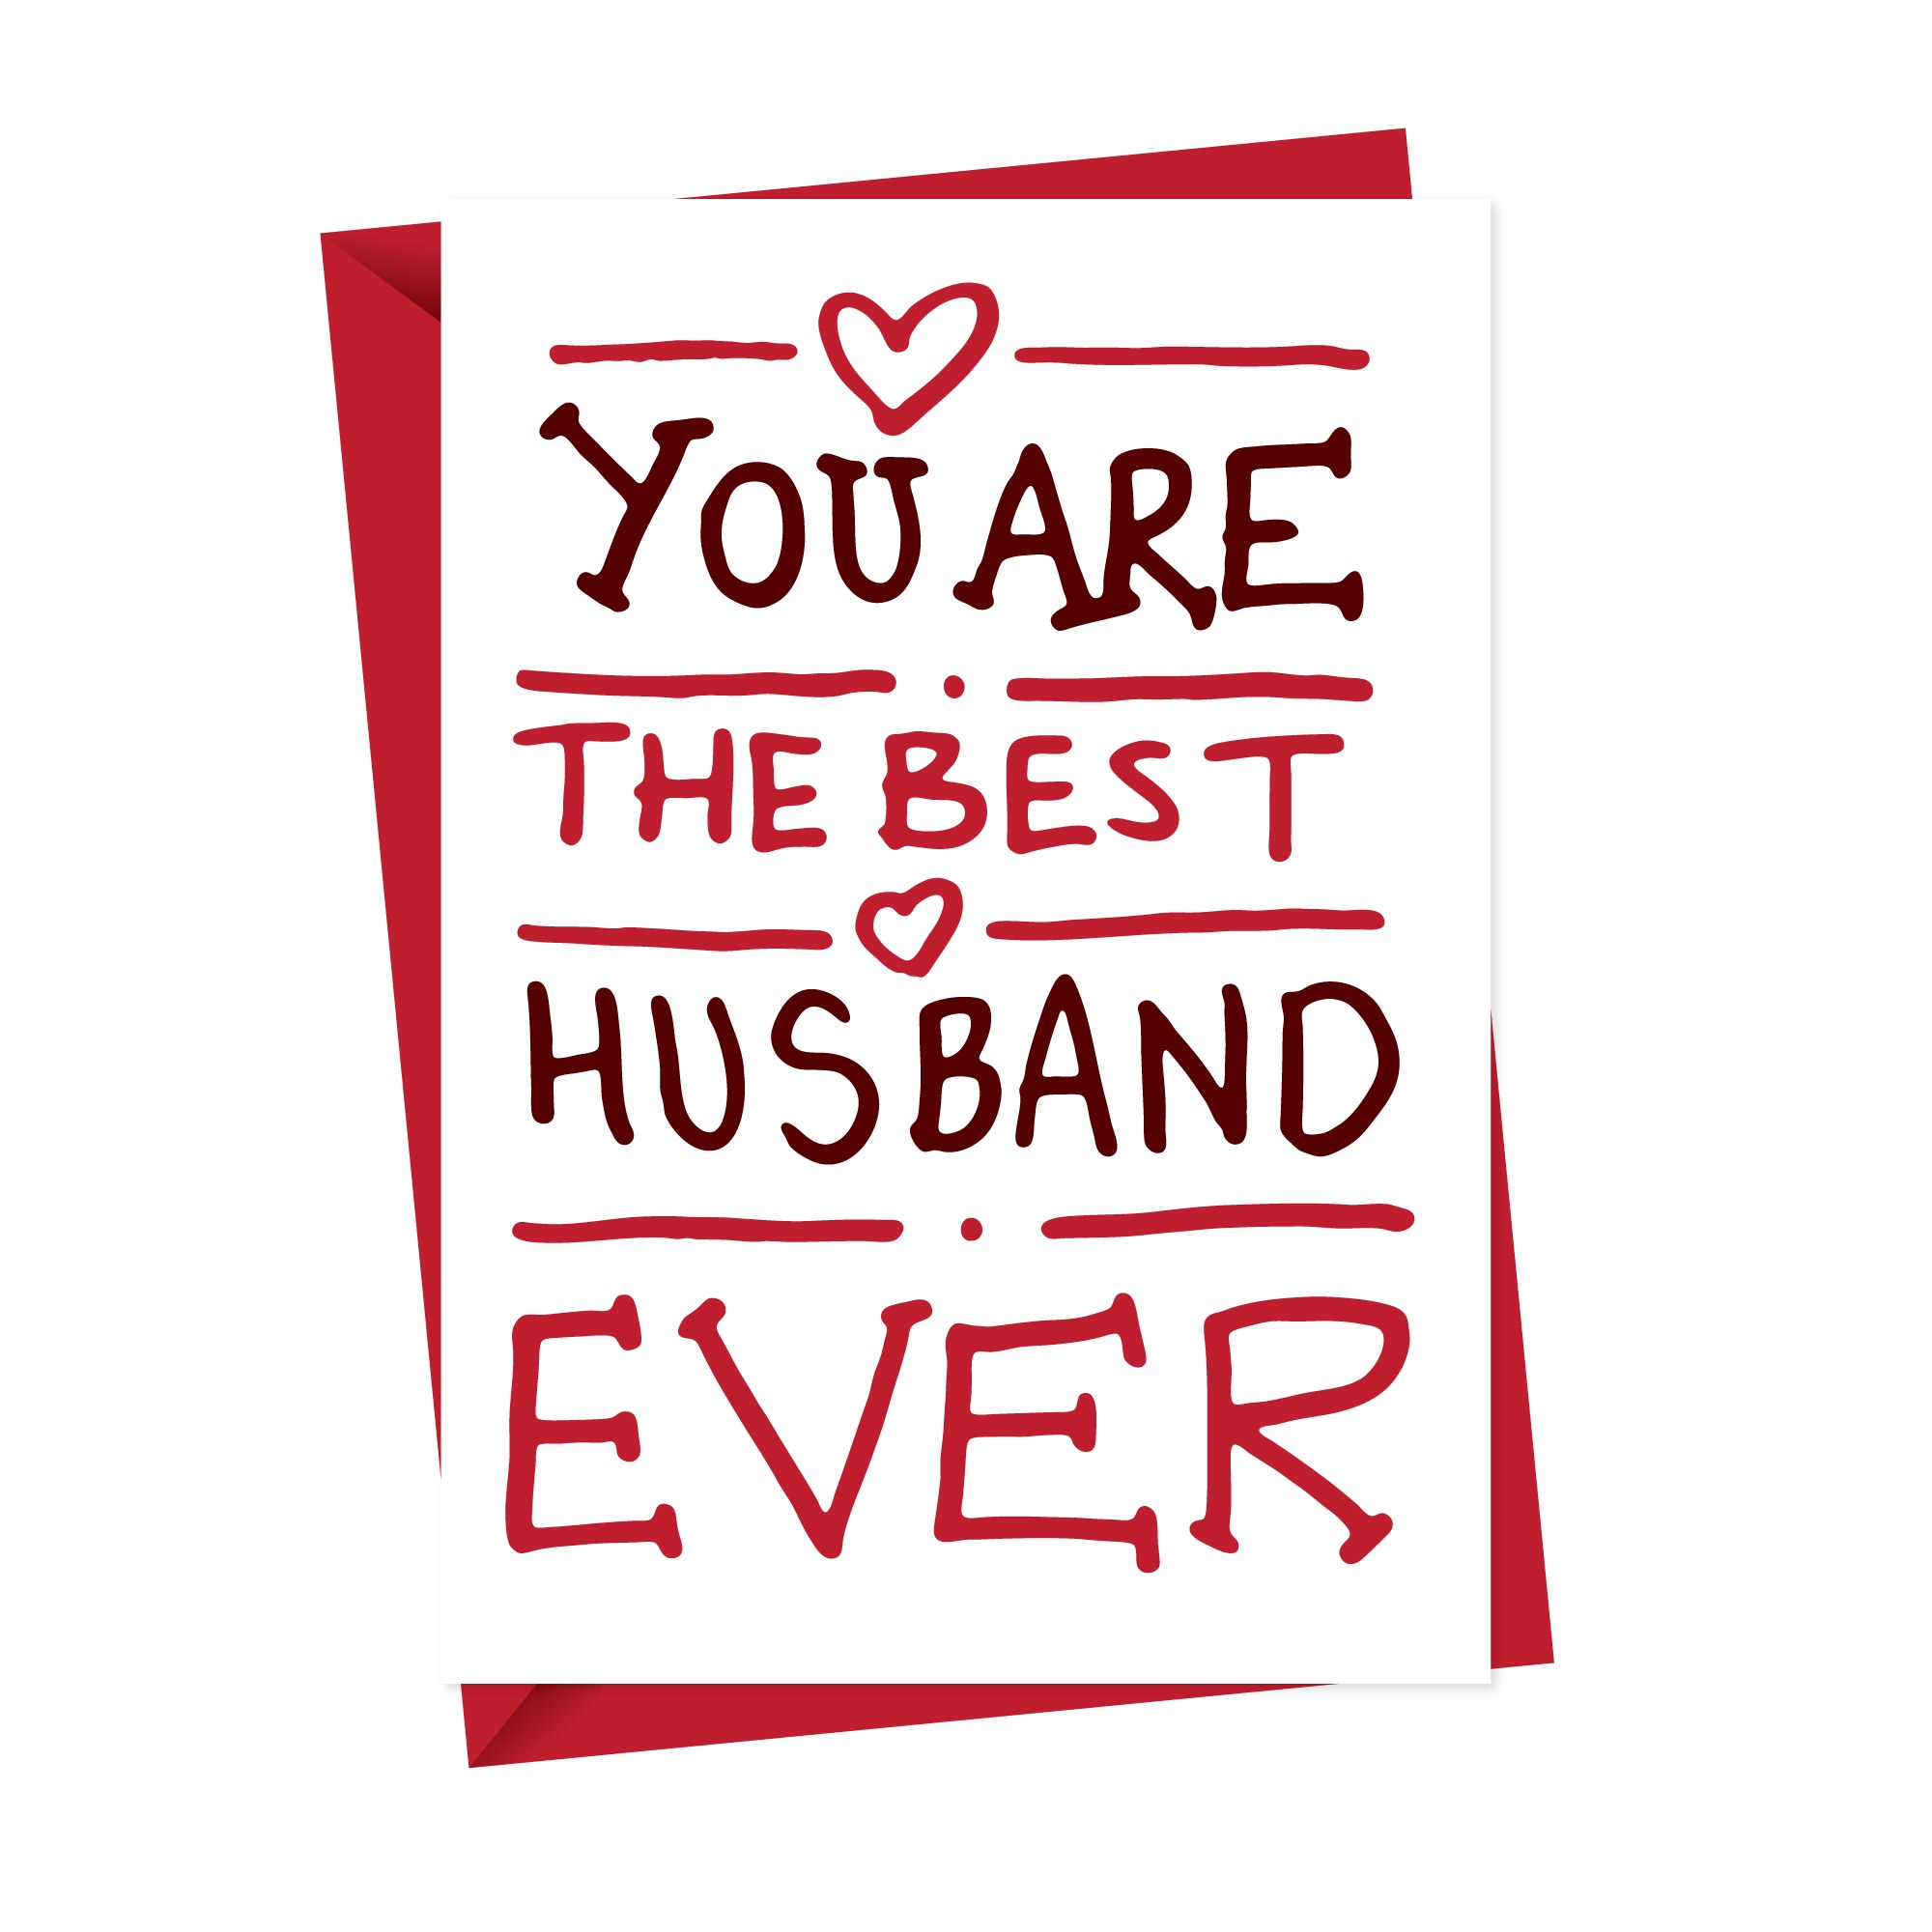 You are the best husband